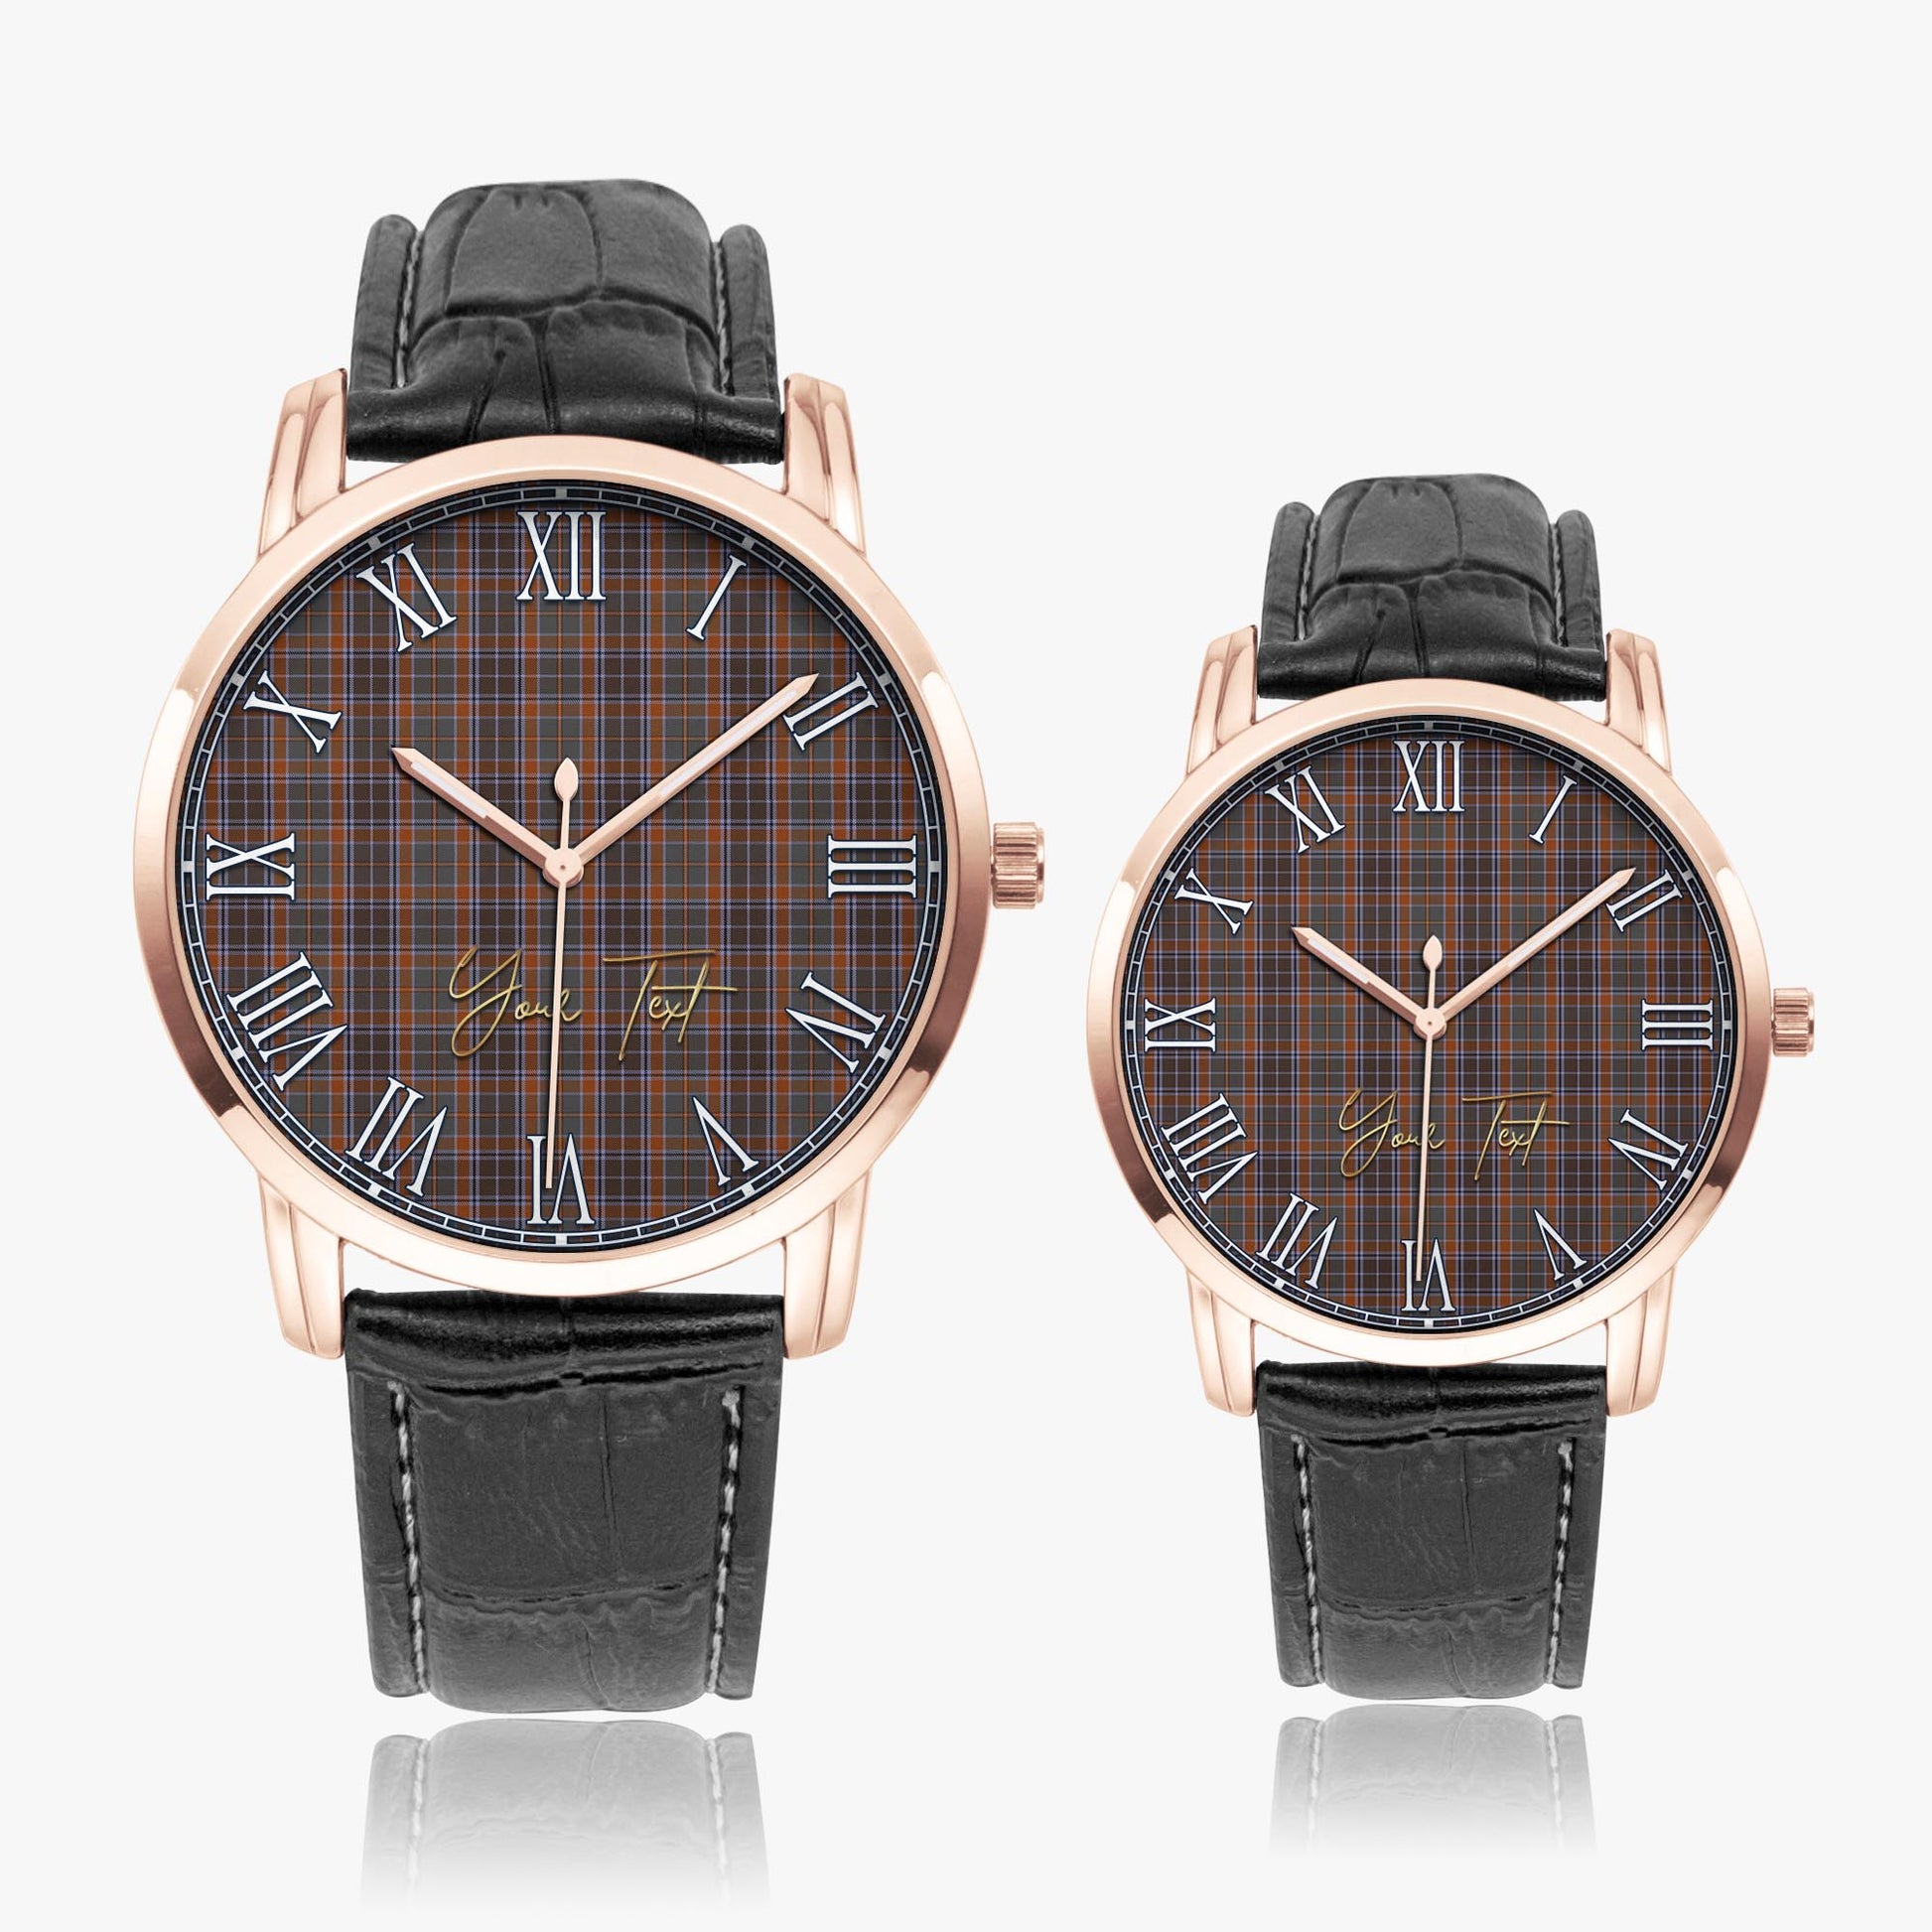 Leitrim County Ireland Tartan Personalized Your Text Leather Trap Quartz Watch Wide Type Rose Gold Case With Black Leather Strap - Tartanvibesclothing